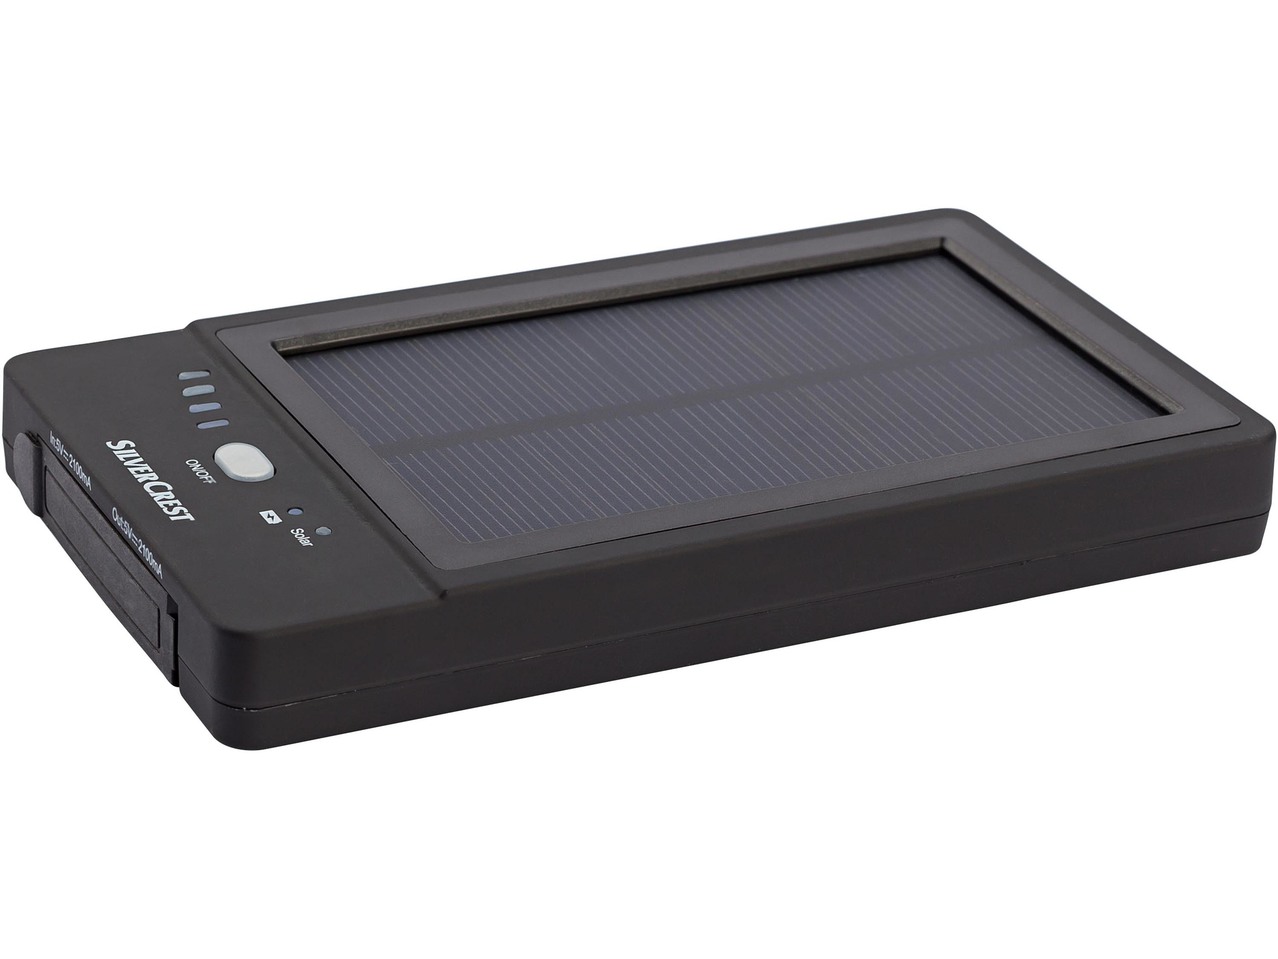 Power Bank with Solar Charger, 5000mAh